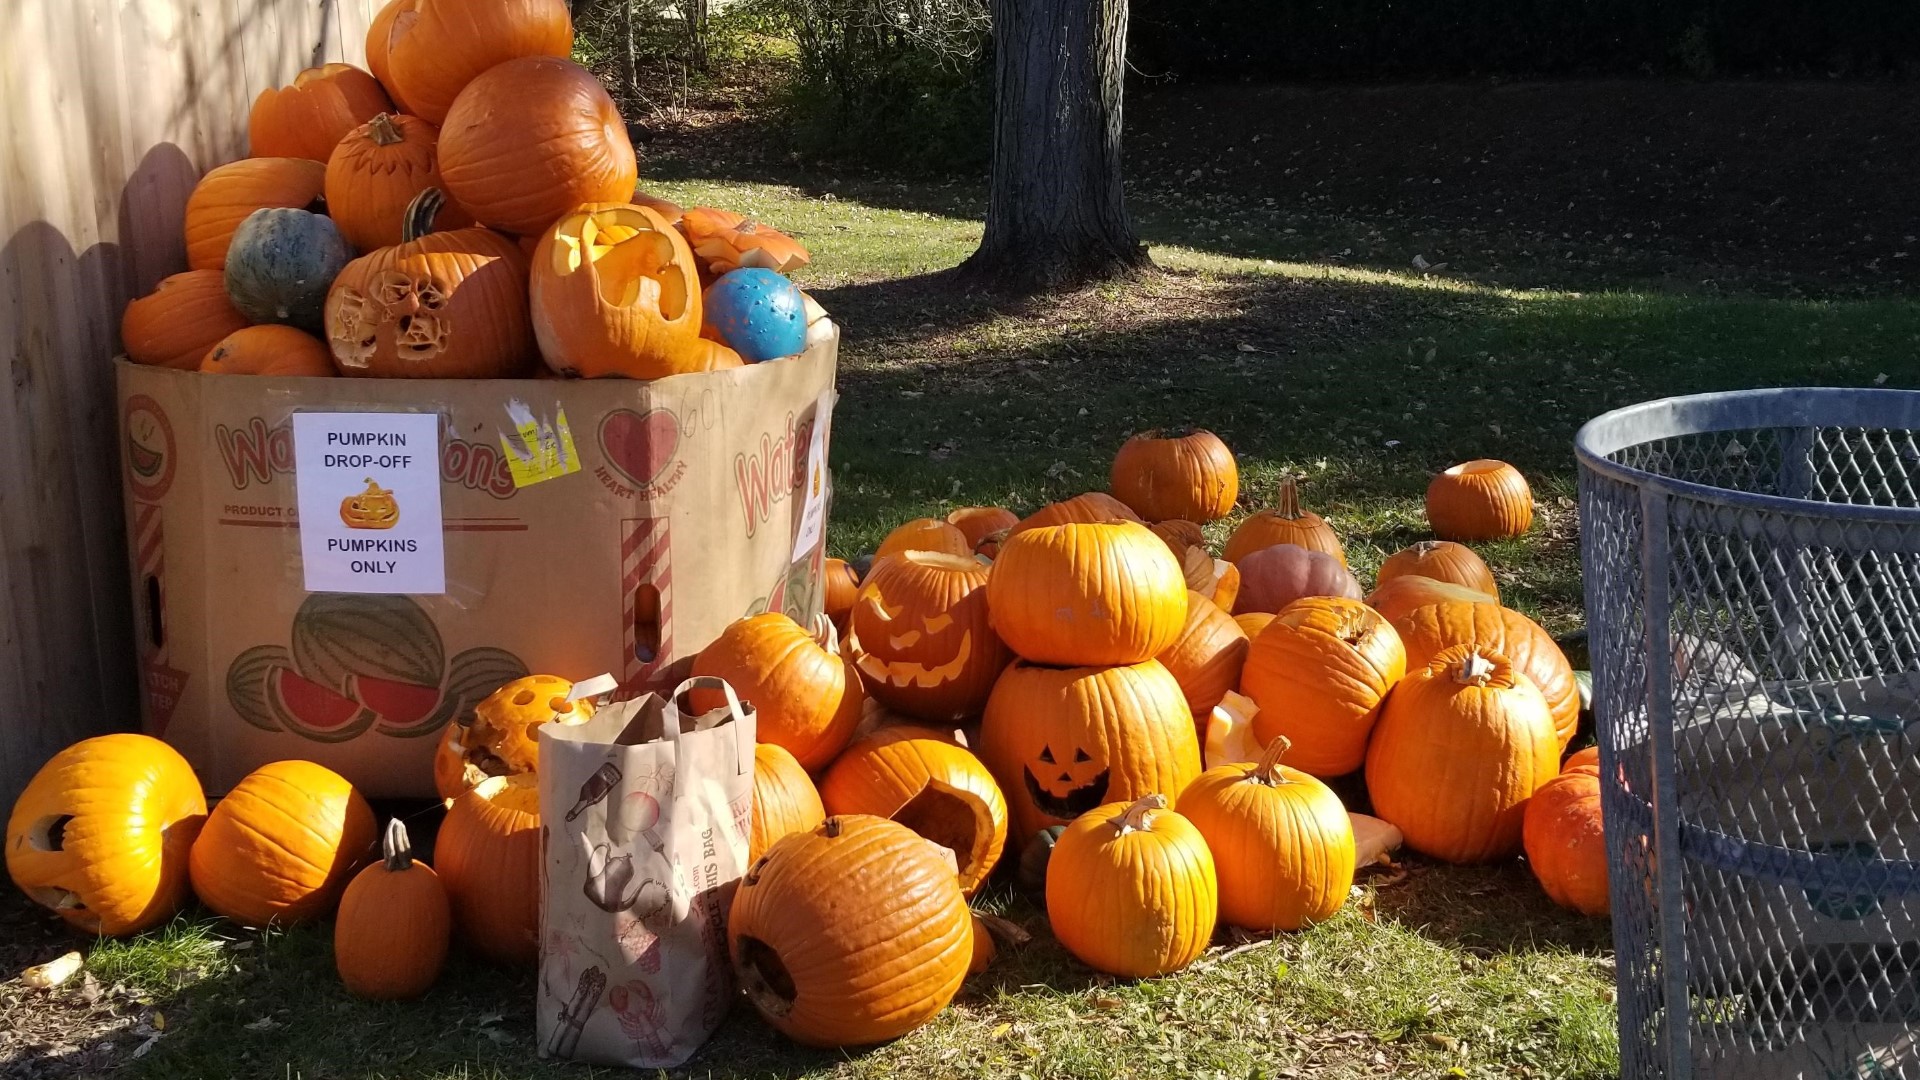 Central Ohio towns are helping the environment by providing pumpkin collection sites to compost your rotting jack-o’- lanterns.